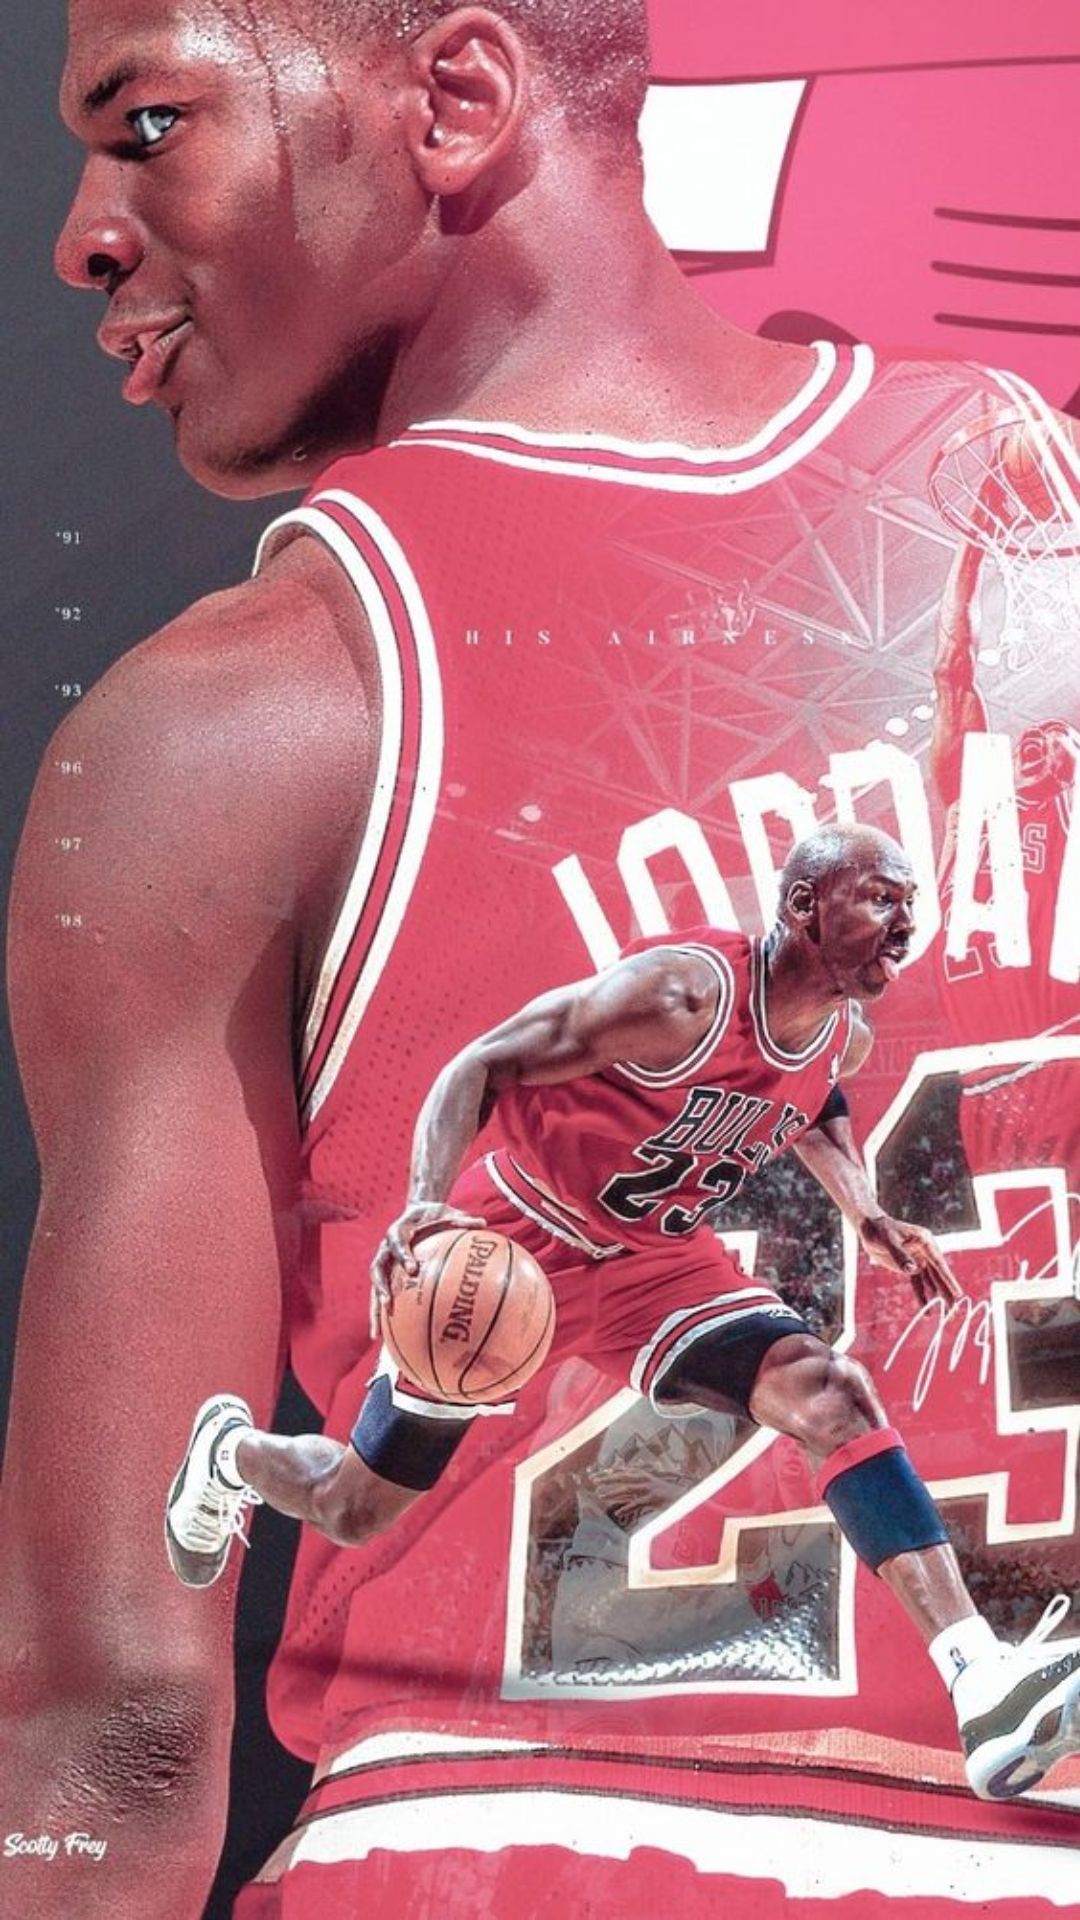 IPhone X Wallpaper HD Michael Jordan with high-resolution 1080x1920 pixel. You can use this wallpaper for your iPhone 5, 6, 7, 8, X, XS, XR backgrounds, Mobile Screensaver, or iPad Lock Screen - Michael Jordan